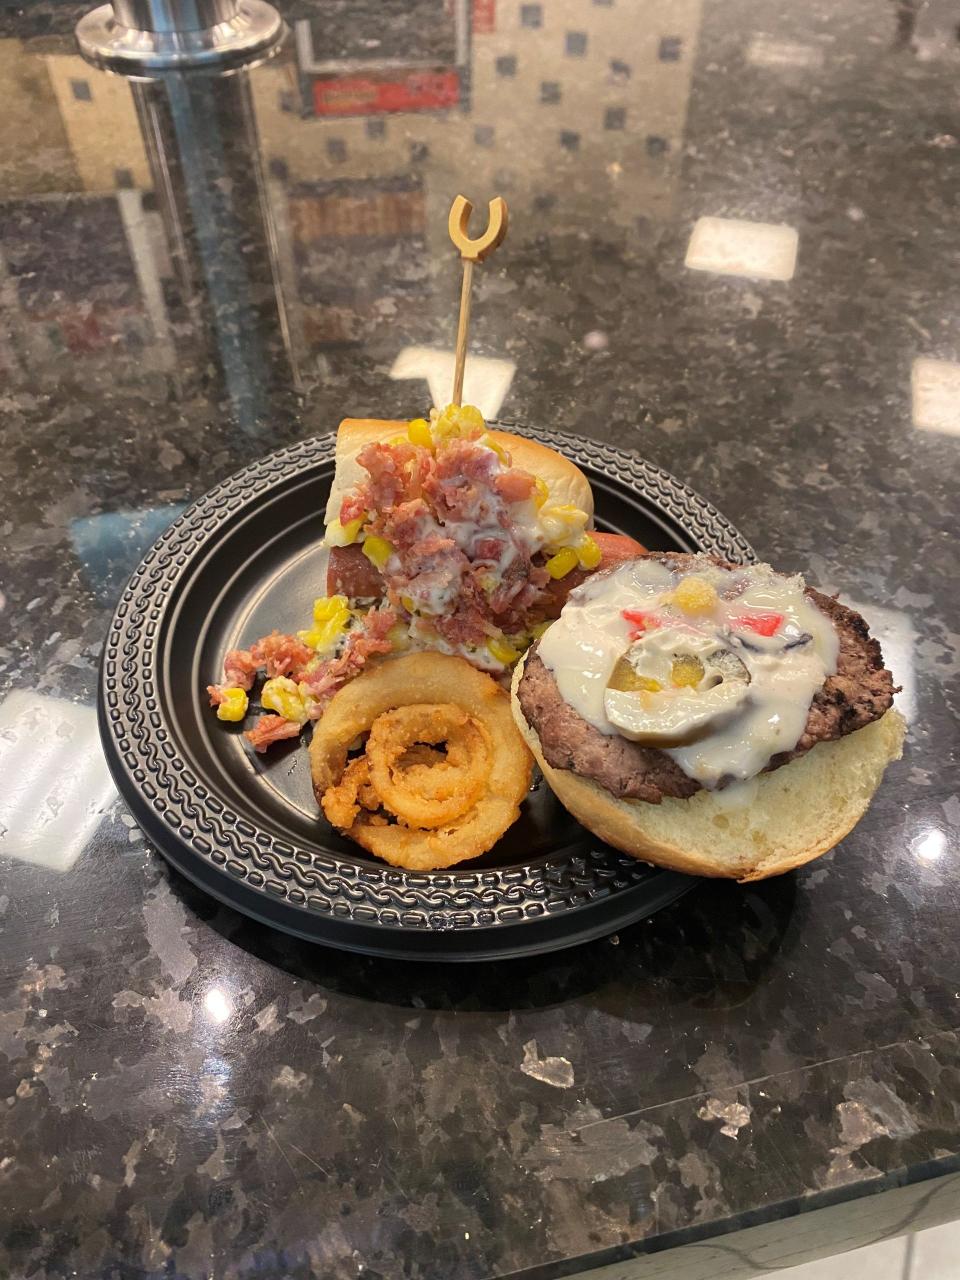 Loaded burger and dogs, available at Lucas Oil Stadium in 2023.